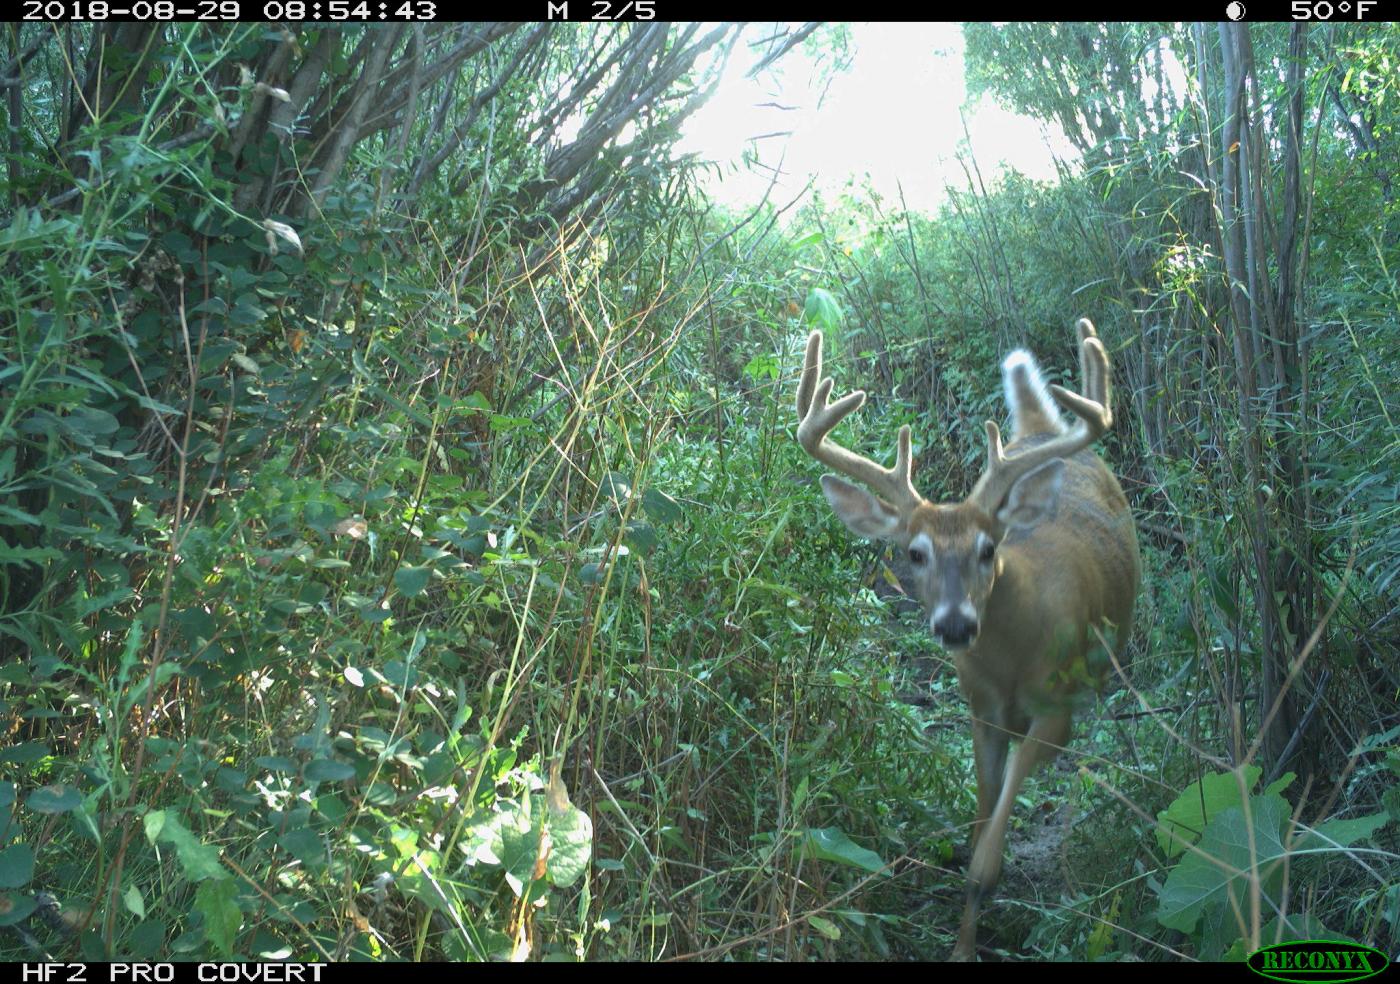 A camera trap photo of a white-tailed deer with large antlers walking through tall grasses and shrubs